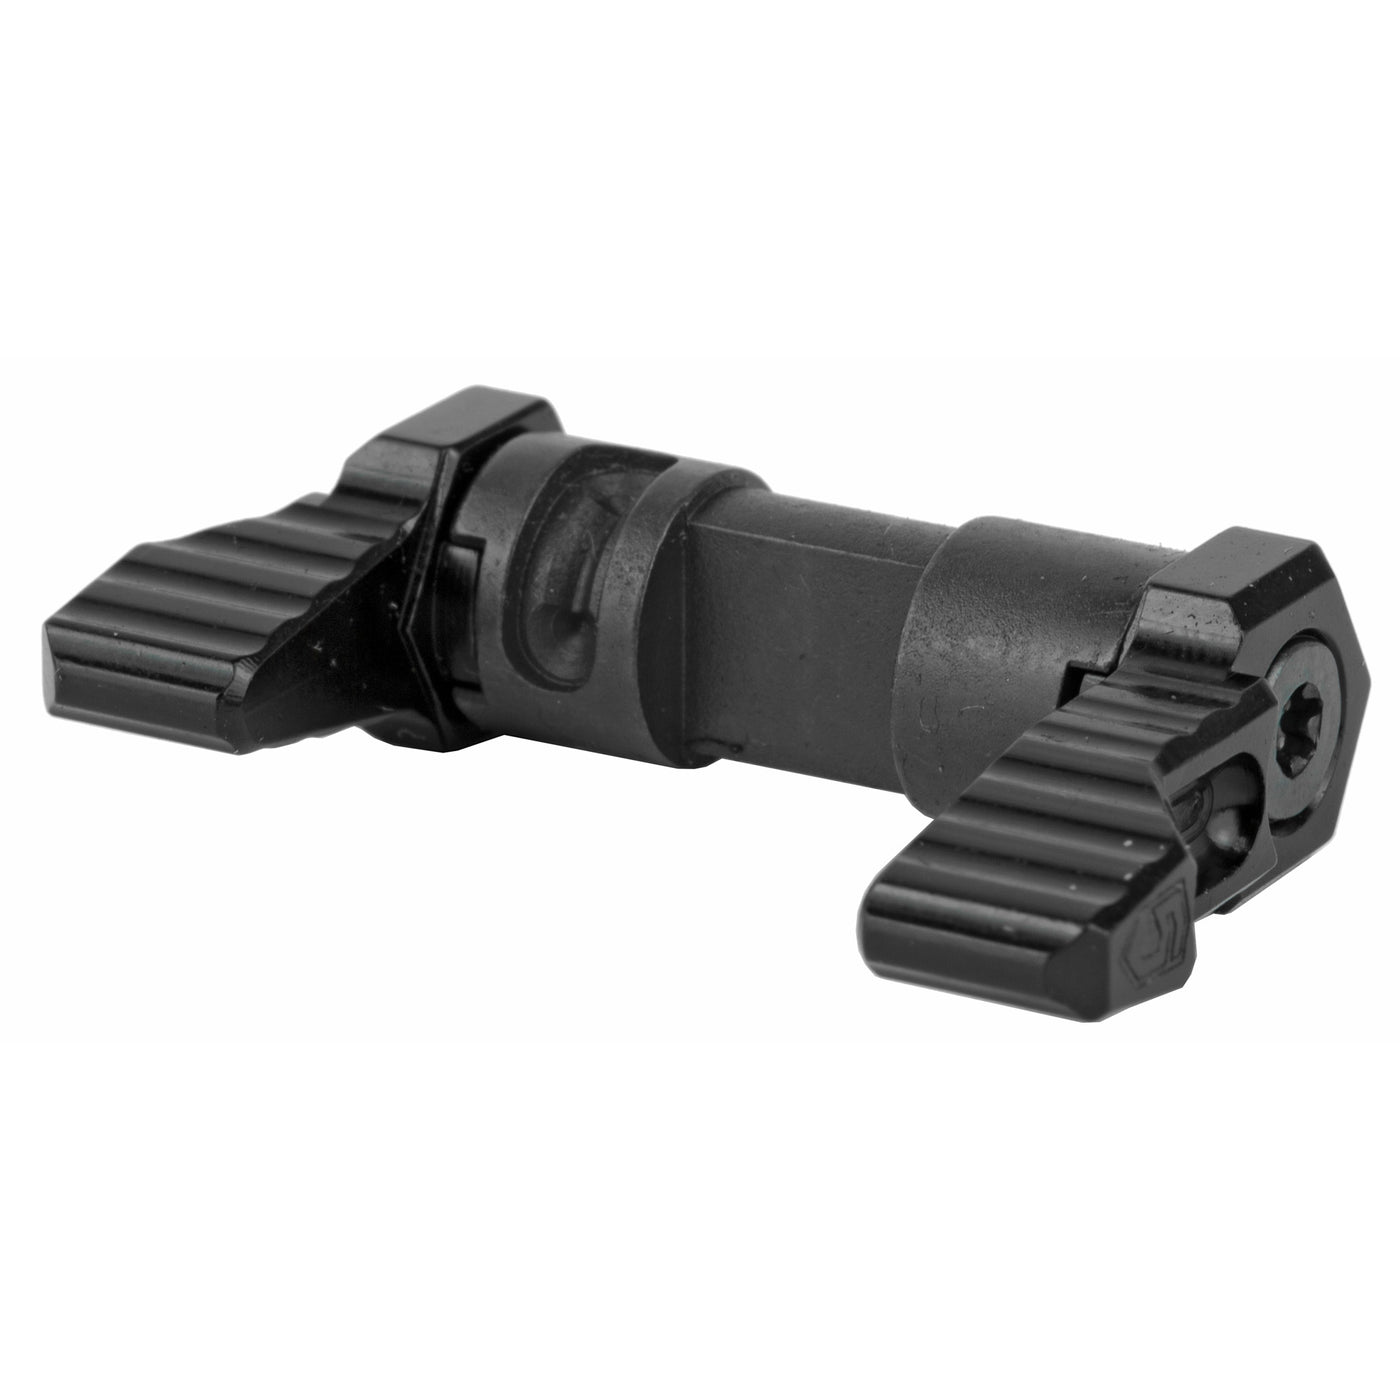 Phase 5 Safety Selector Ambi - 90 Degree For Ar-15 Black